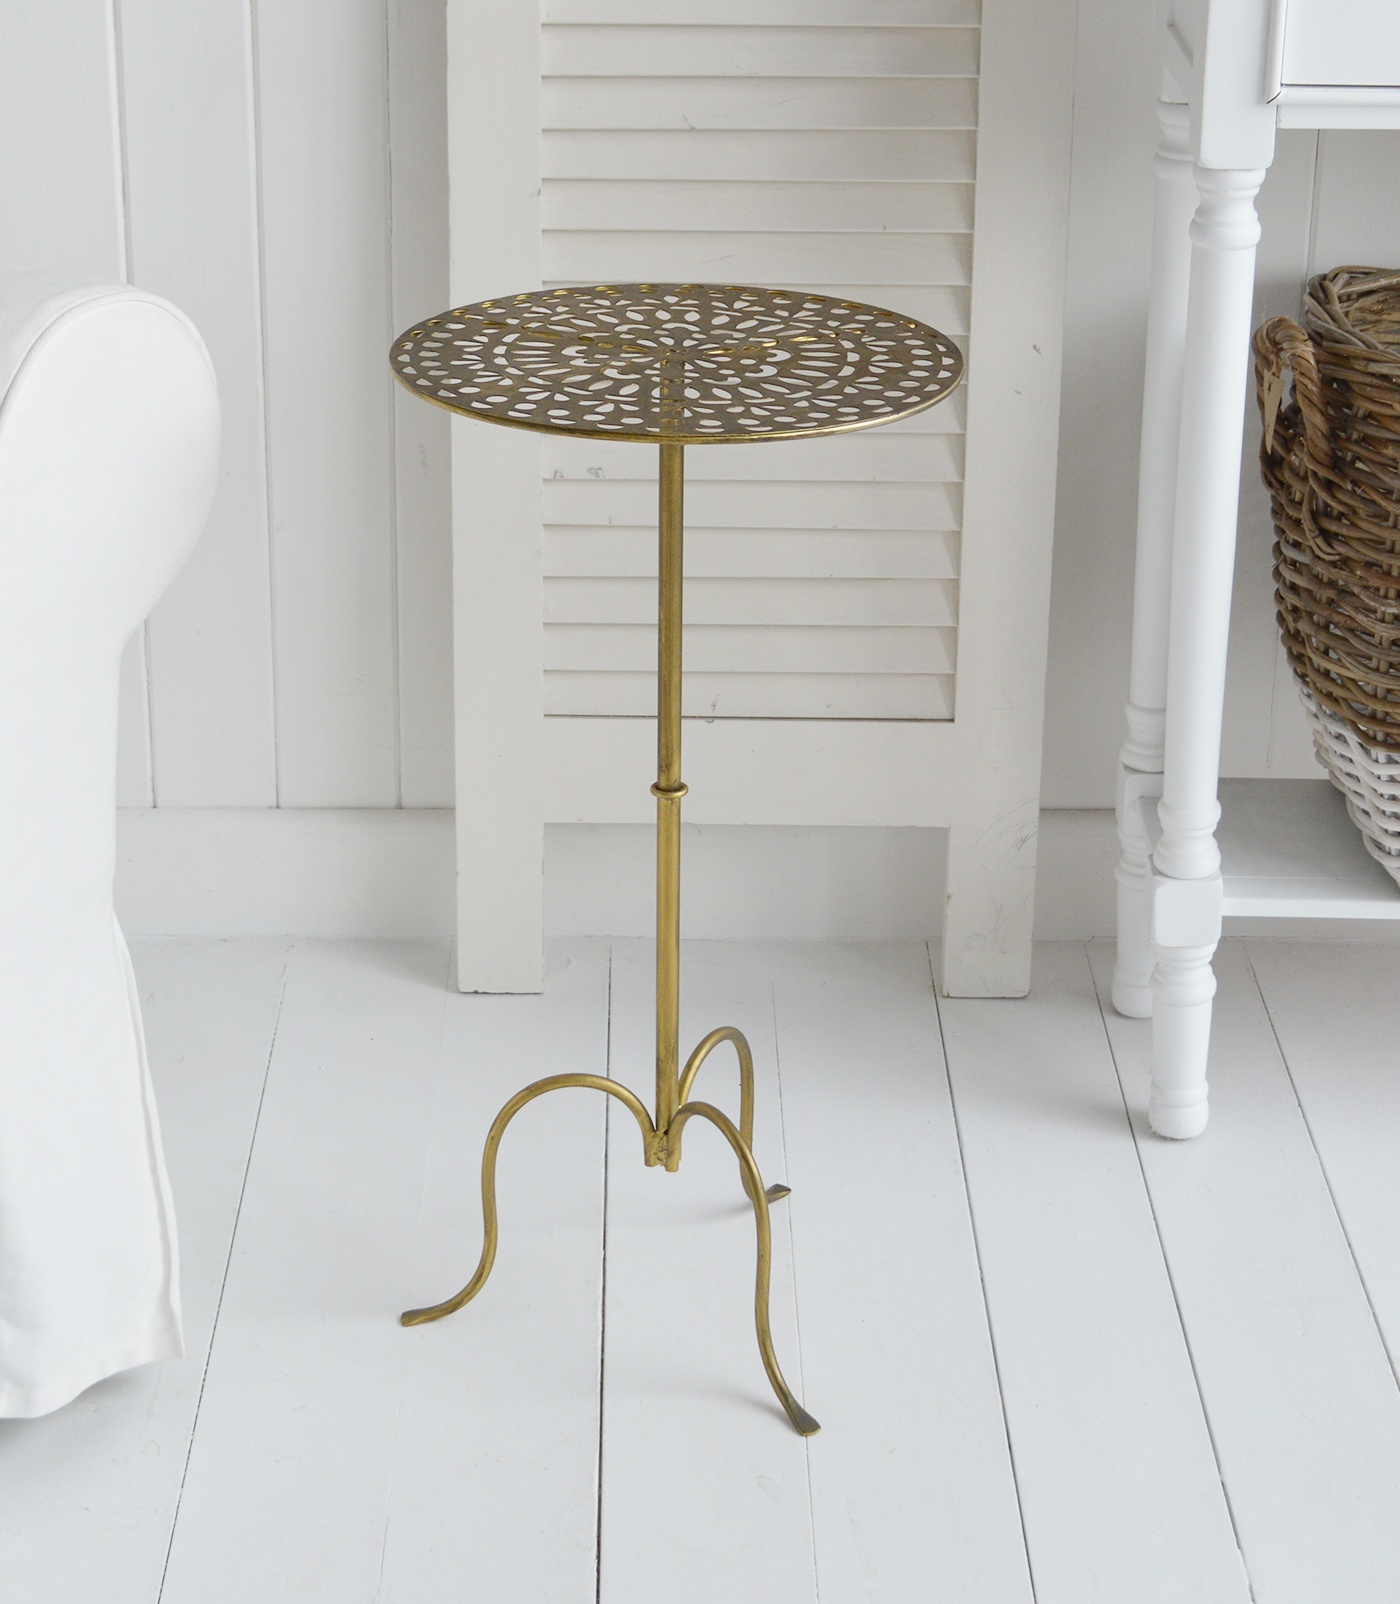 The Montville antique brass small round side table, ideal for bedside, or living room lamp table. Bathroom, Living Room, Bedroom and Hallway Furniture for beautiful homes. Furniture for New England, country farm house and coastal styled home interiors